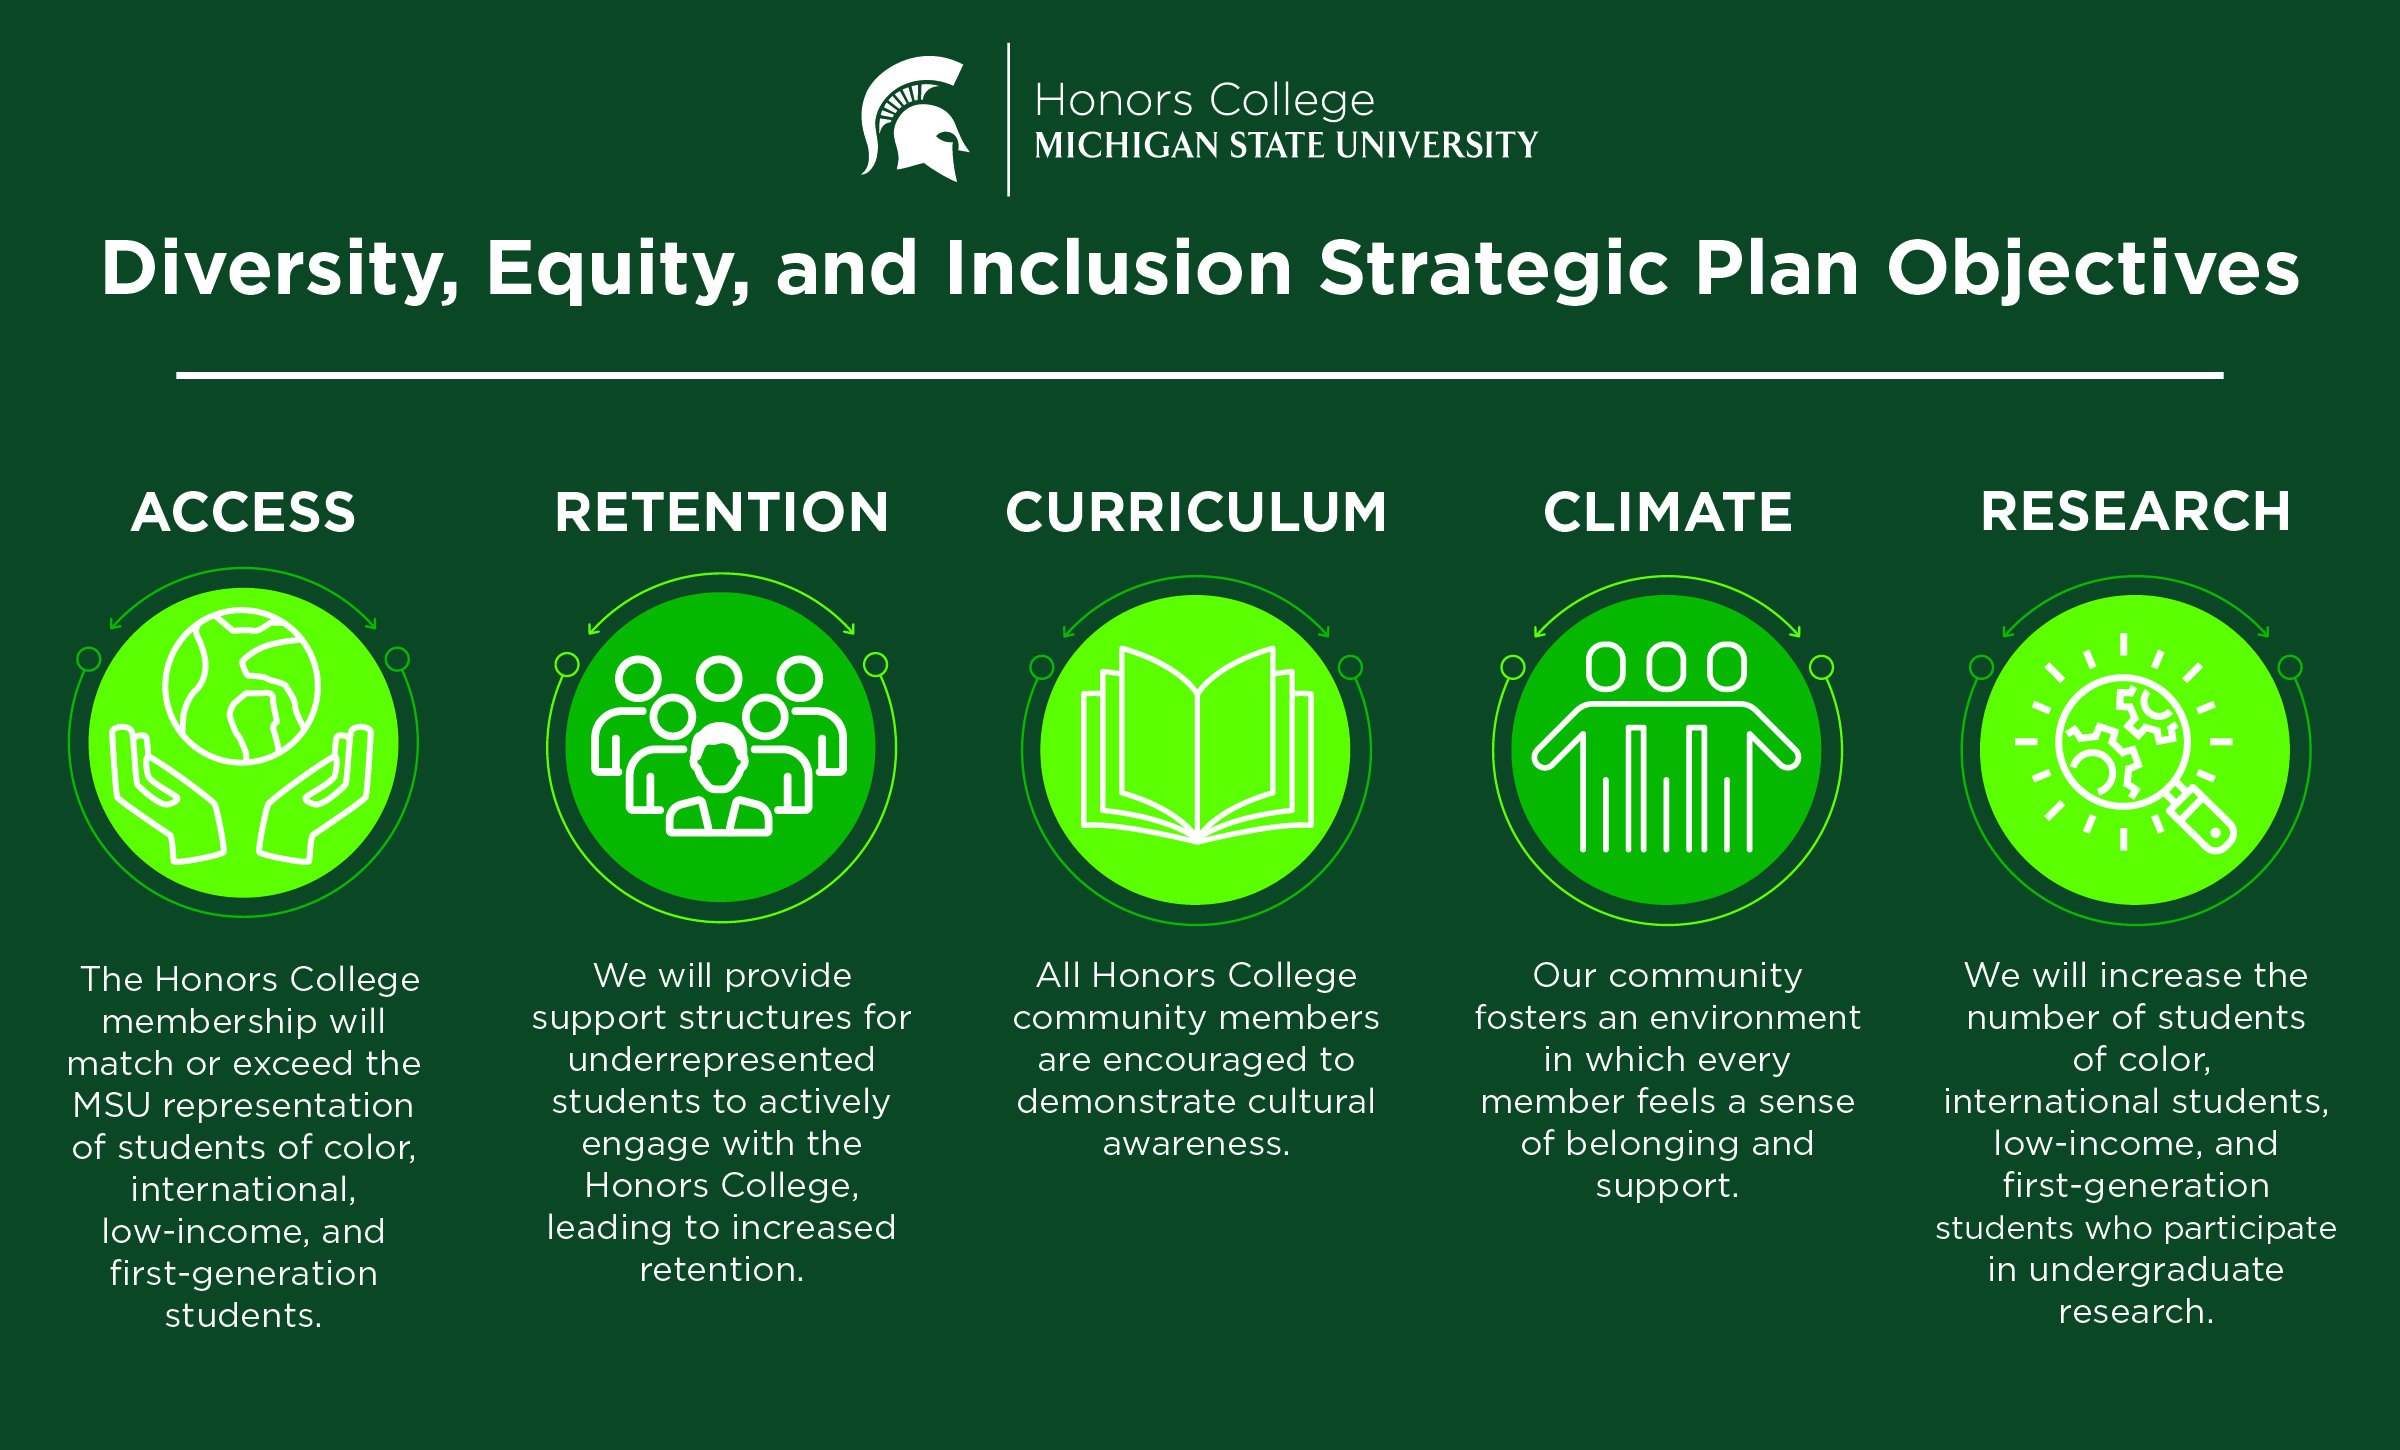 Diversity, Equity and Inclusion infographic